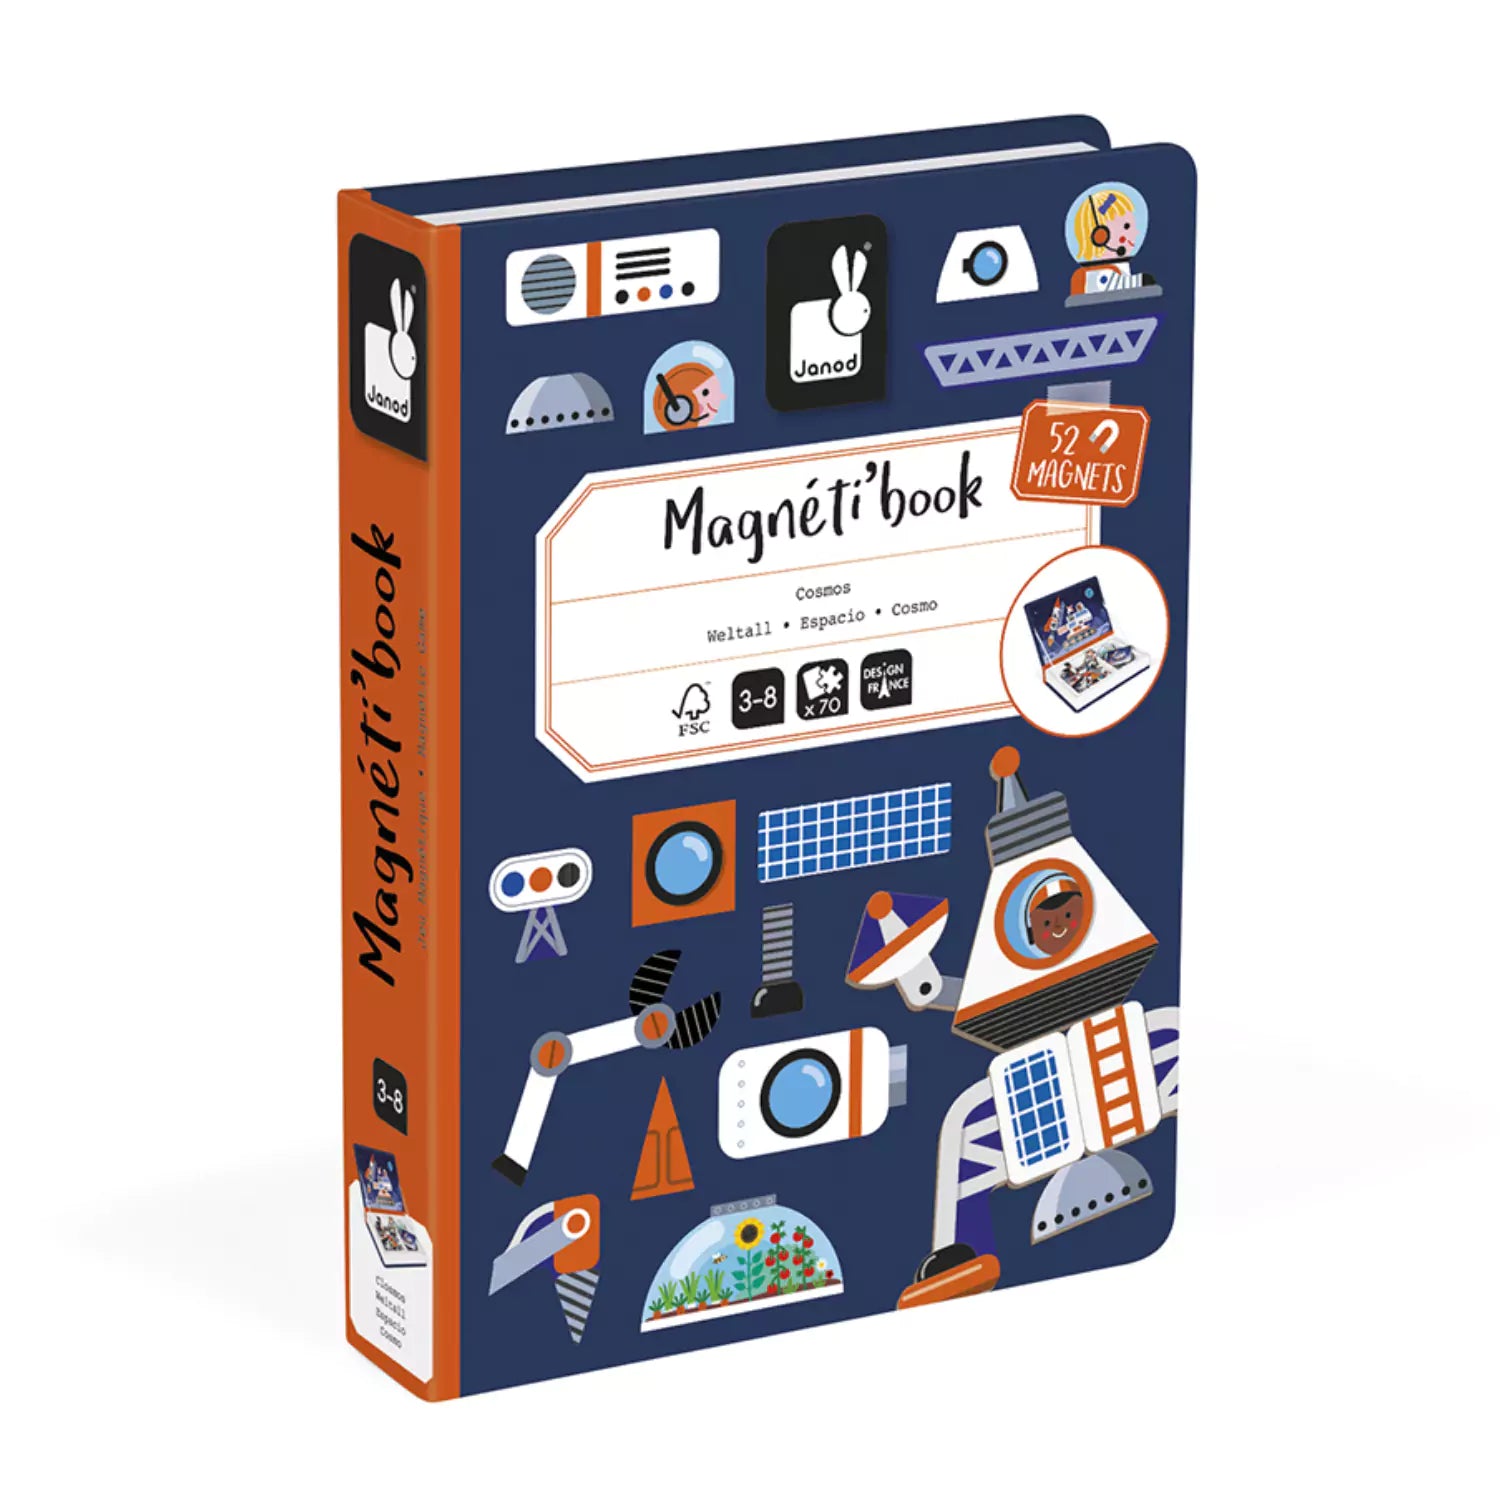 An image of Janod magneti'book - 52 Magnets | Order Now